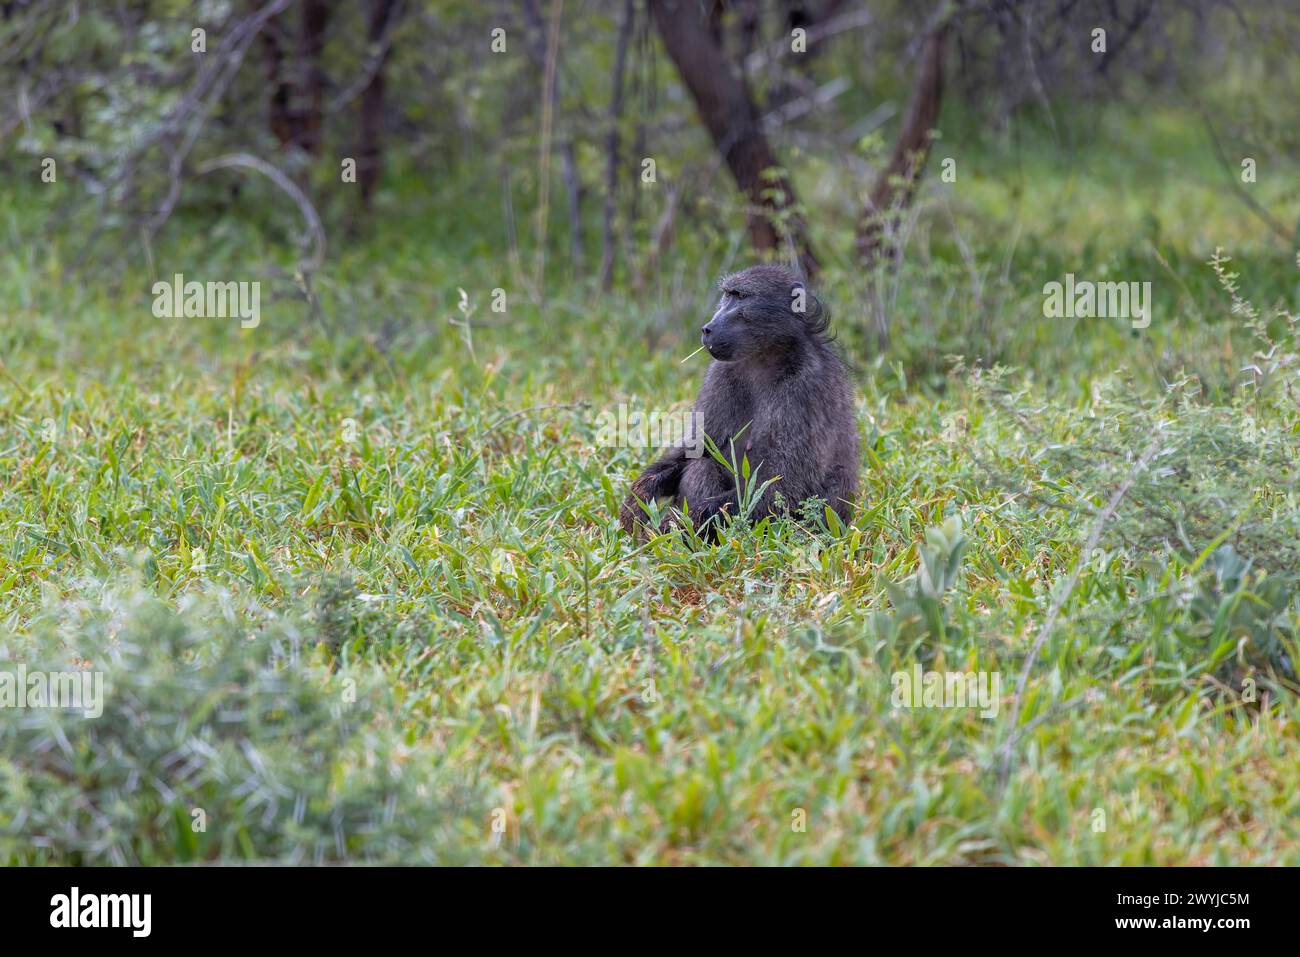 Picture of a single baboon sitting on an open meadow in Namibia during the day Stock Photo